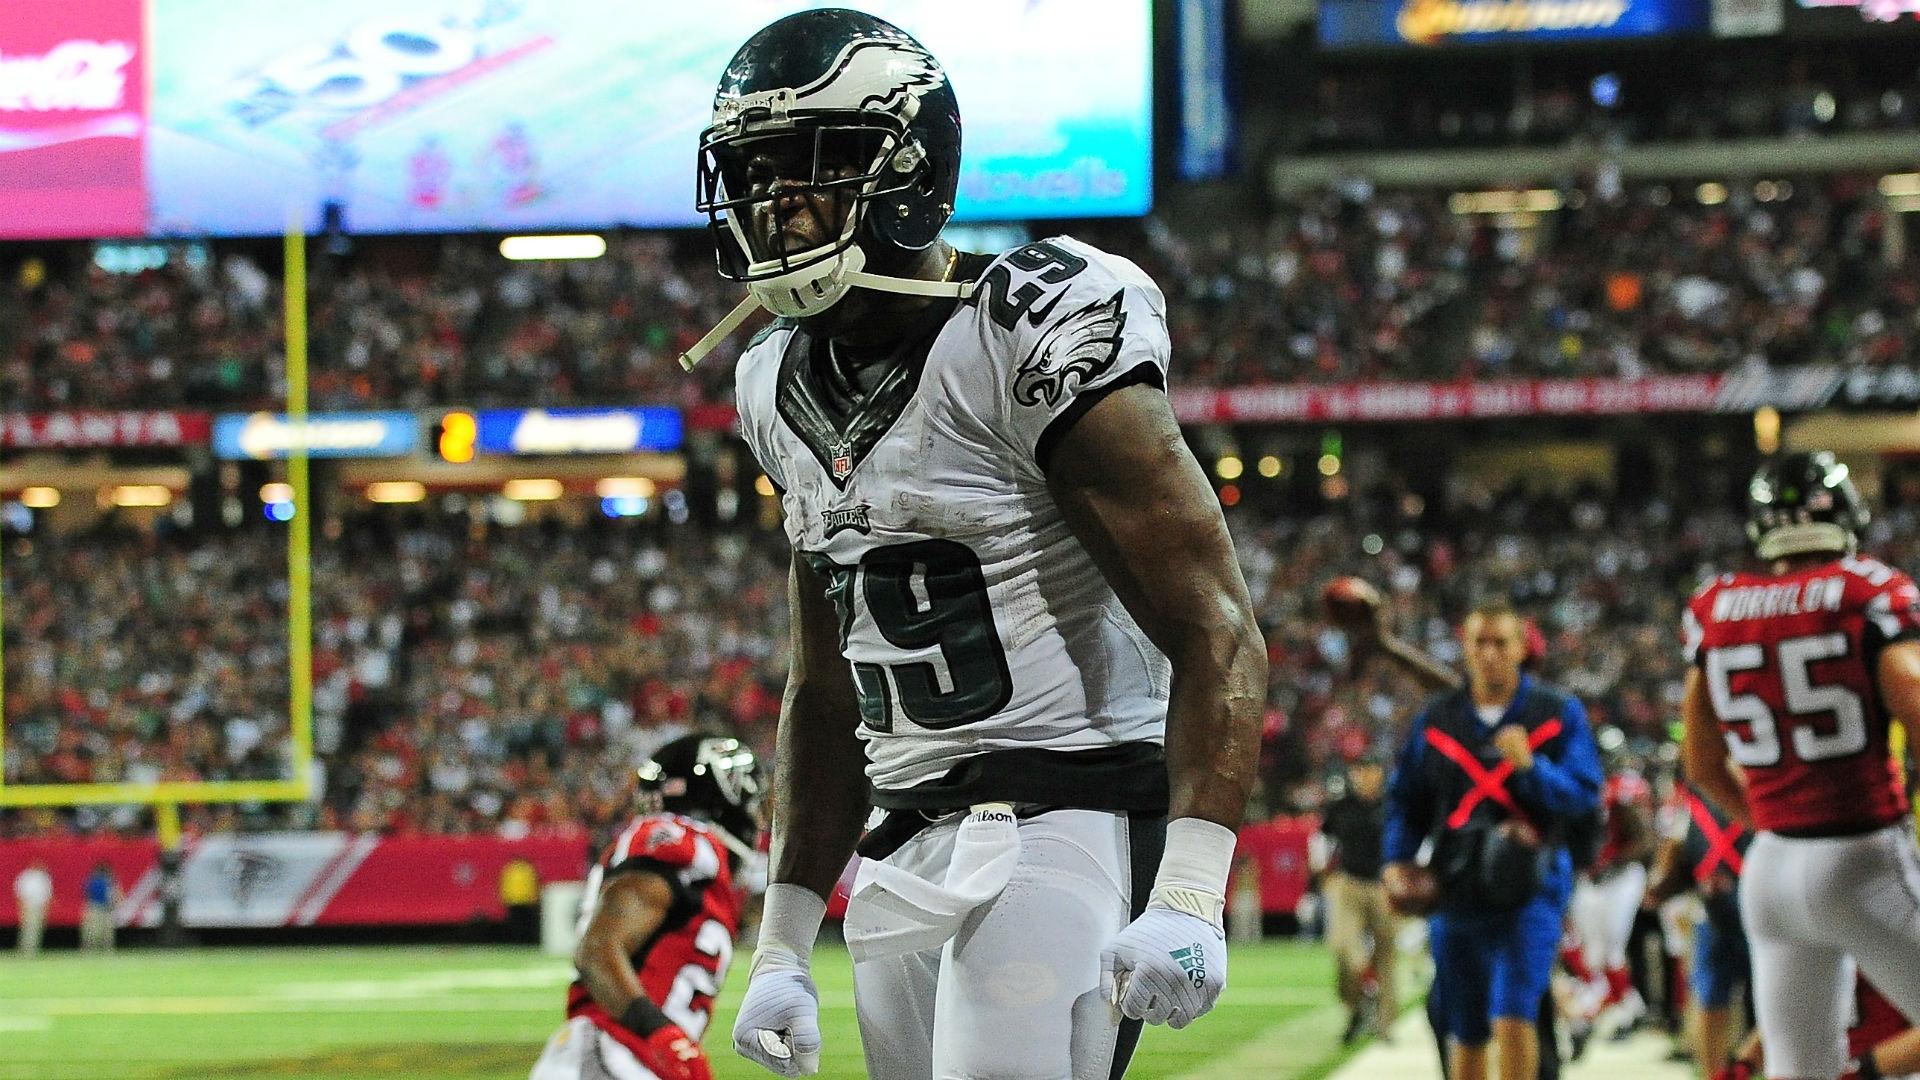 Eagles' DeMarco Murray ready for 'fresh start' without Chip Kelly